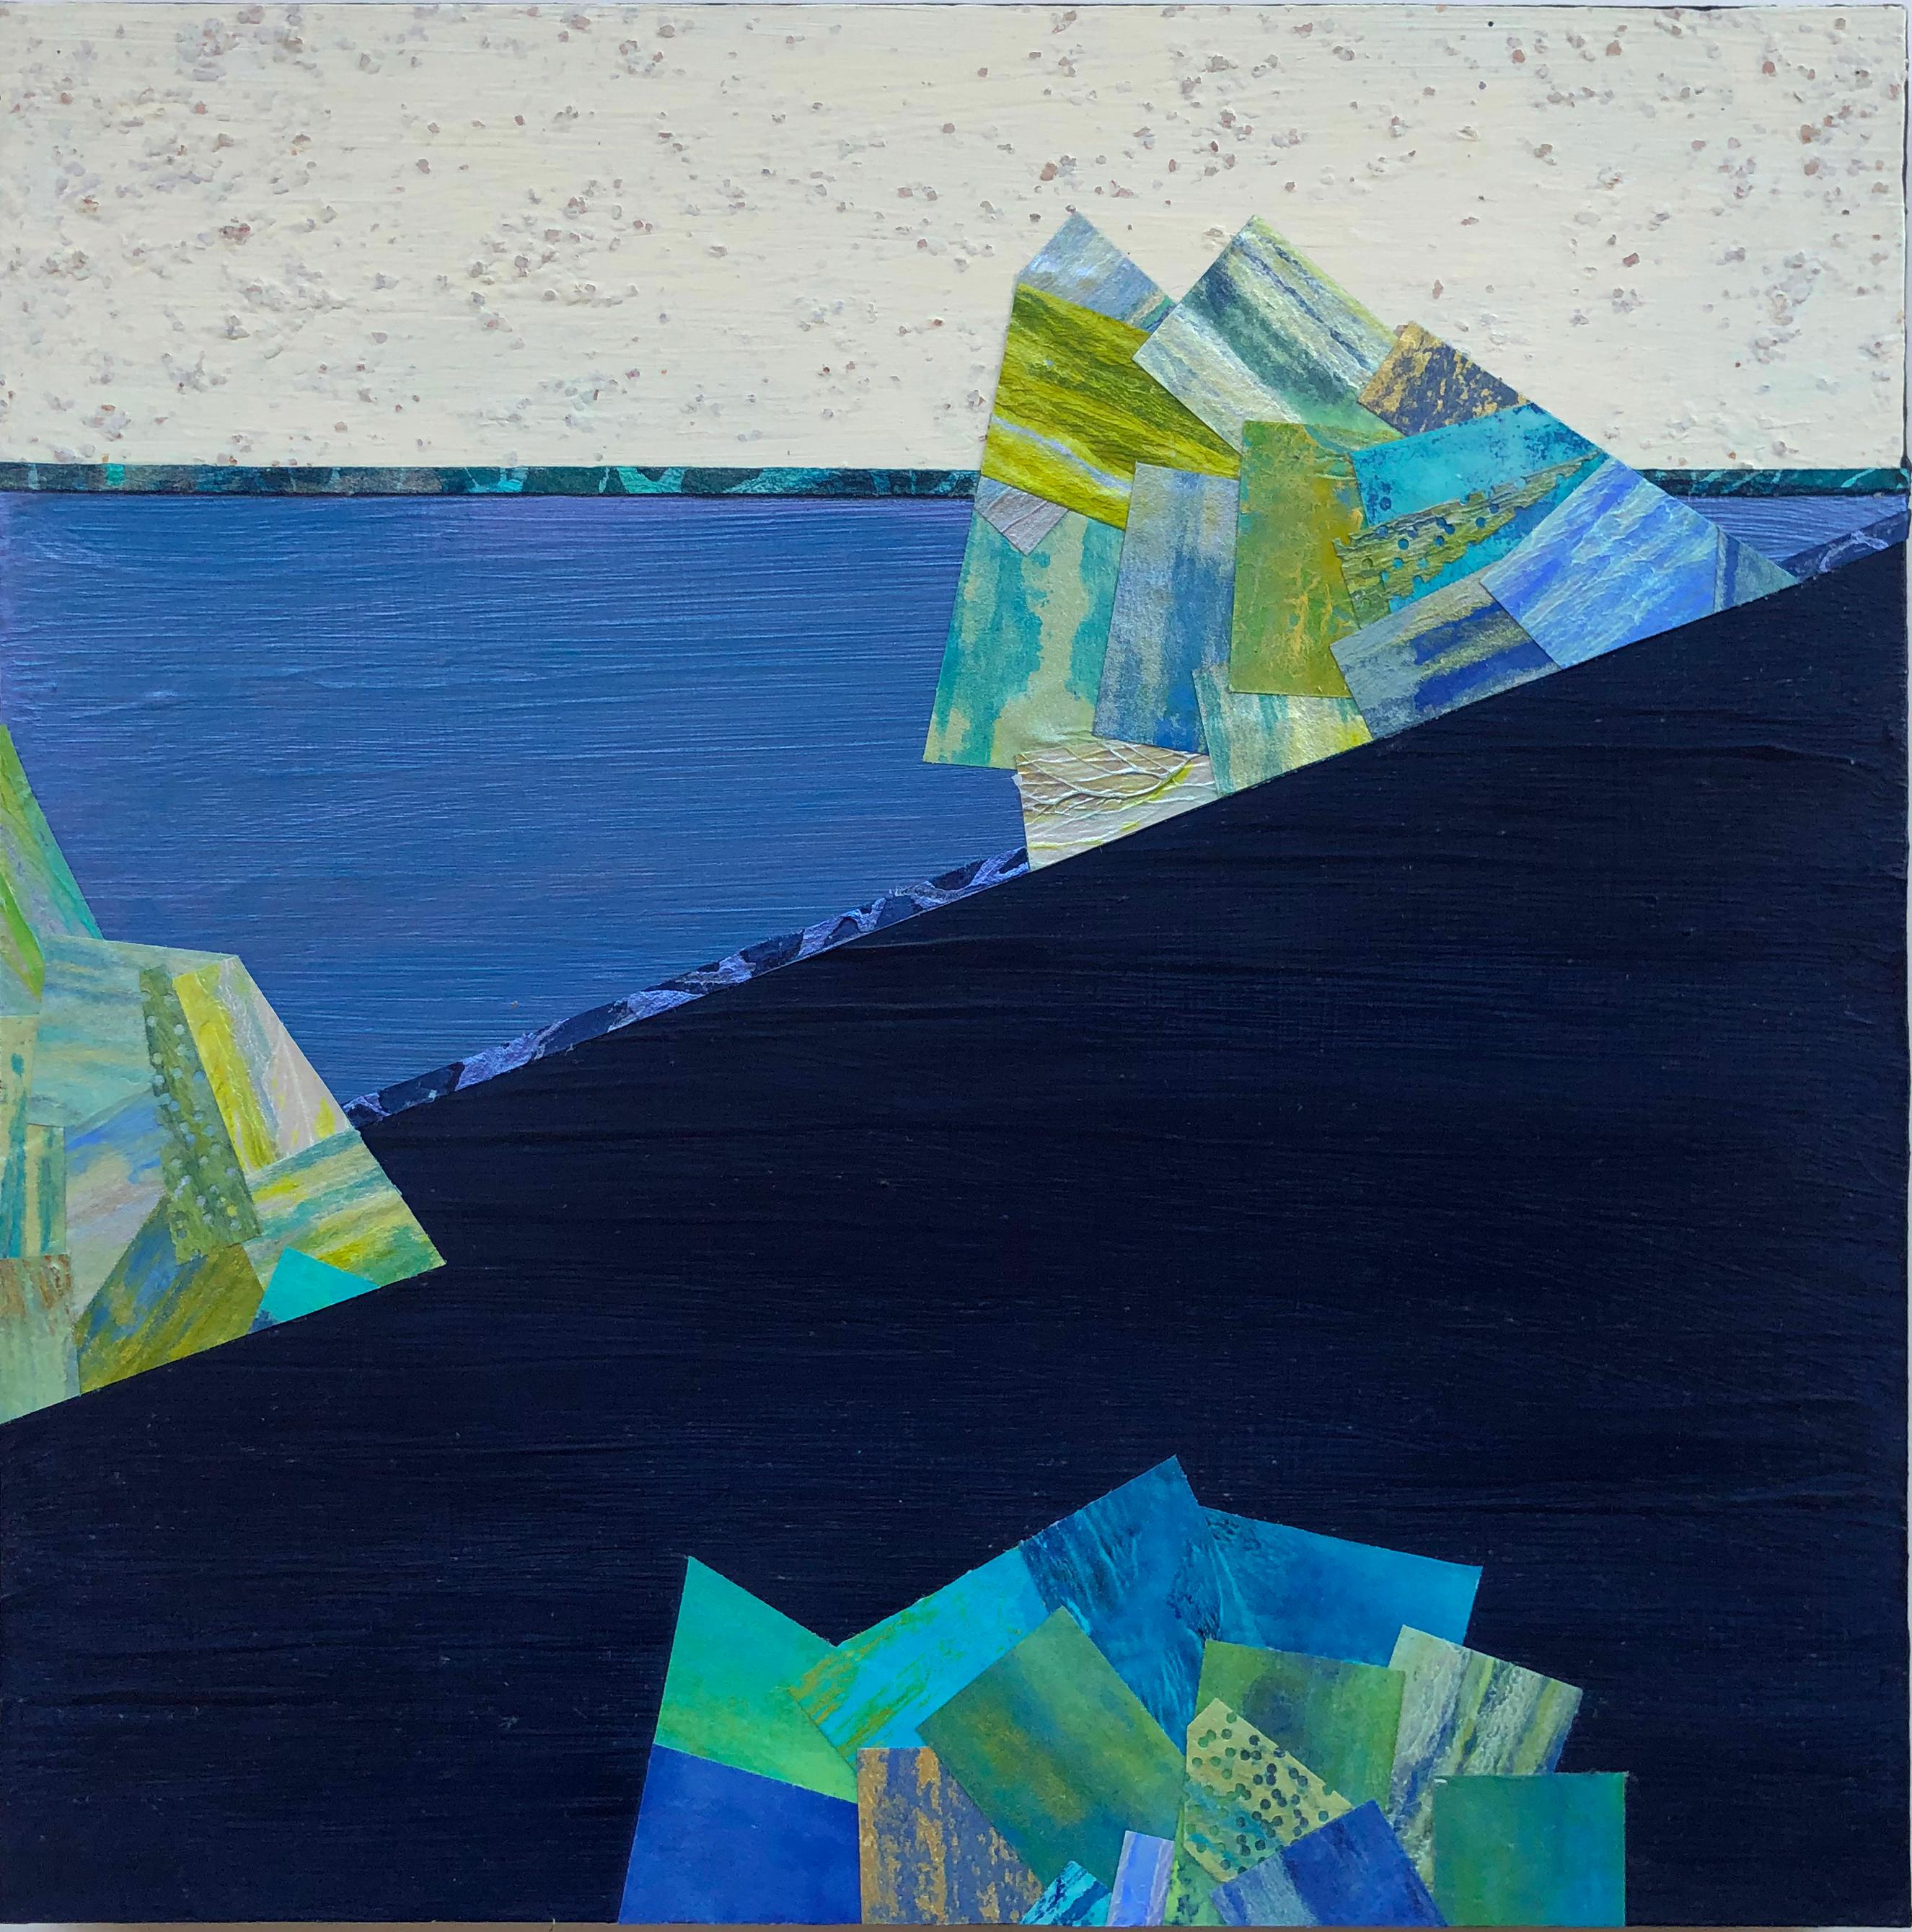 Crossing Lines, Intersections #9, blue and green mixed media painting